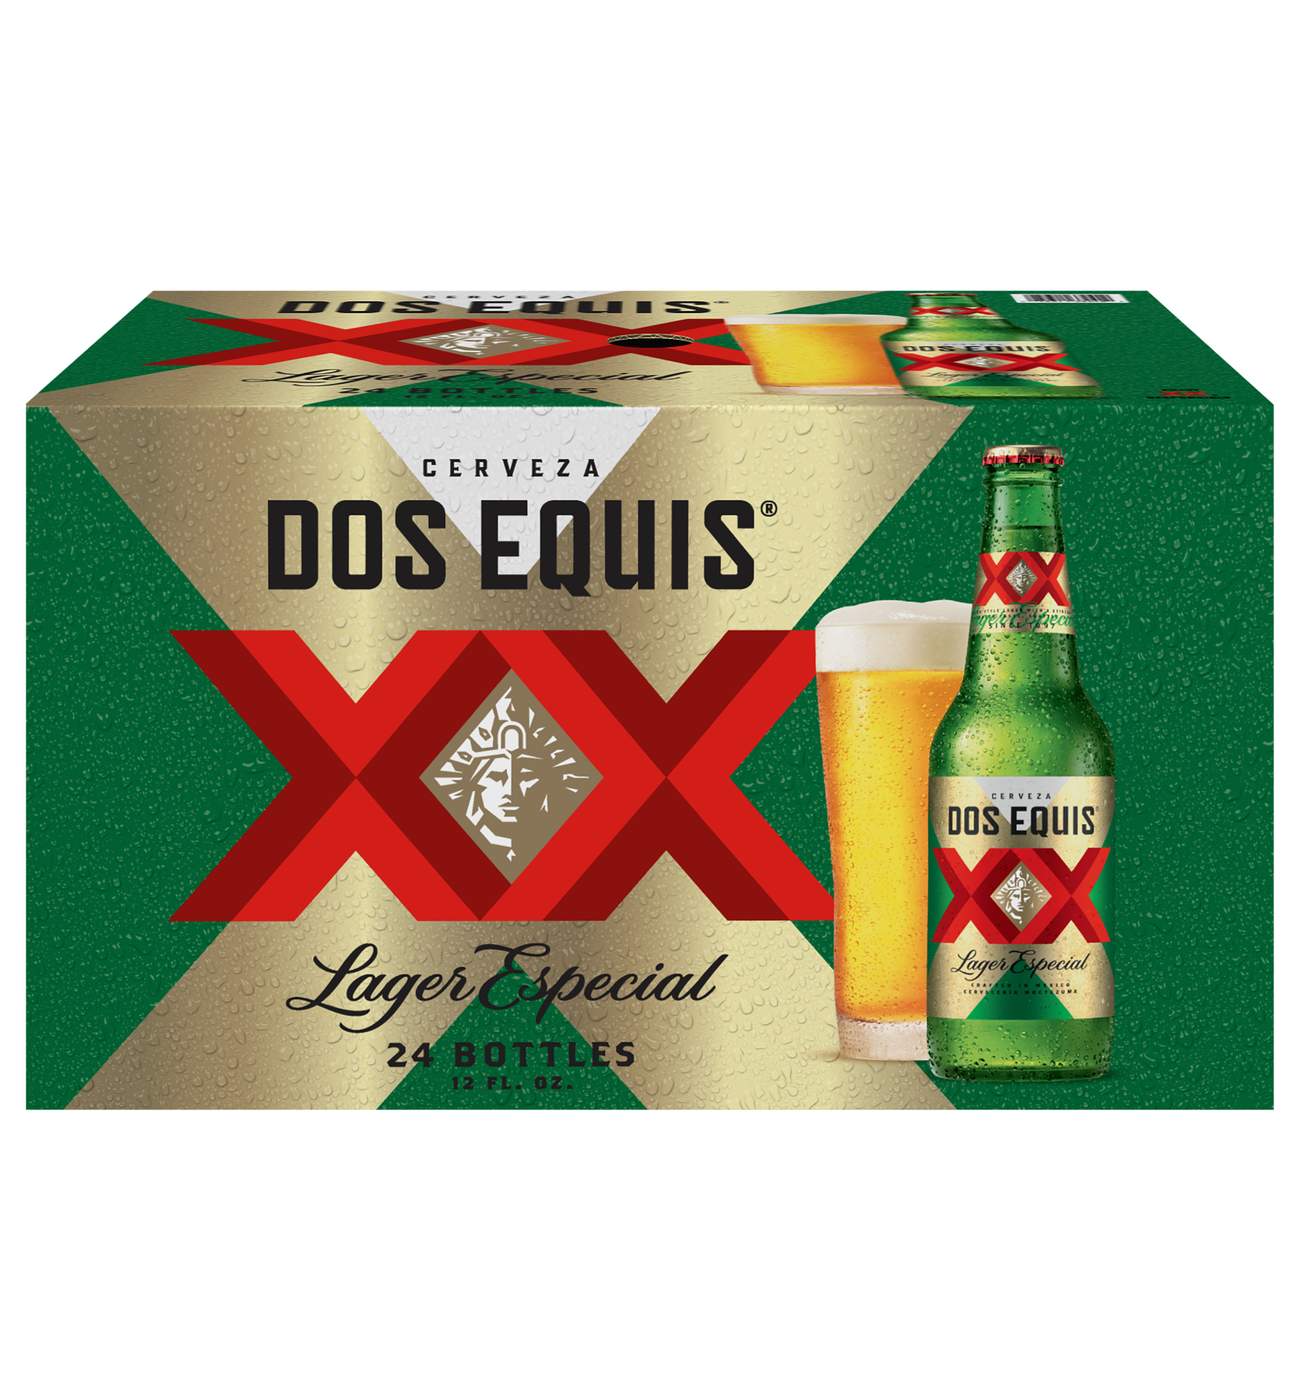 Dos Equis Lager Especial Beer 12 oz Bottles; image 2 of 3